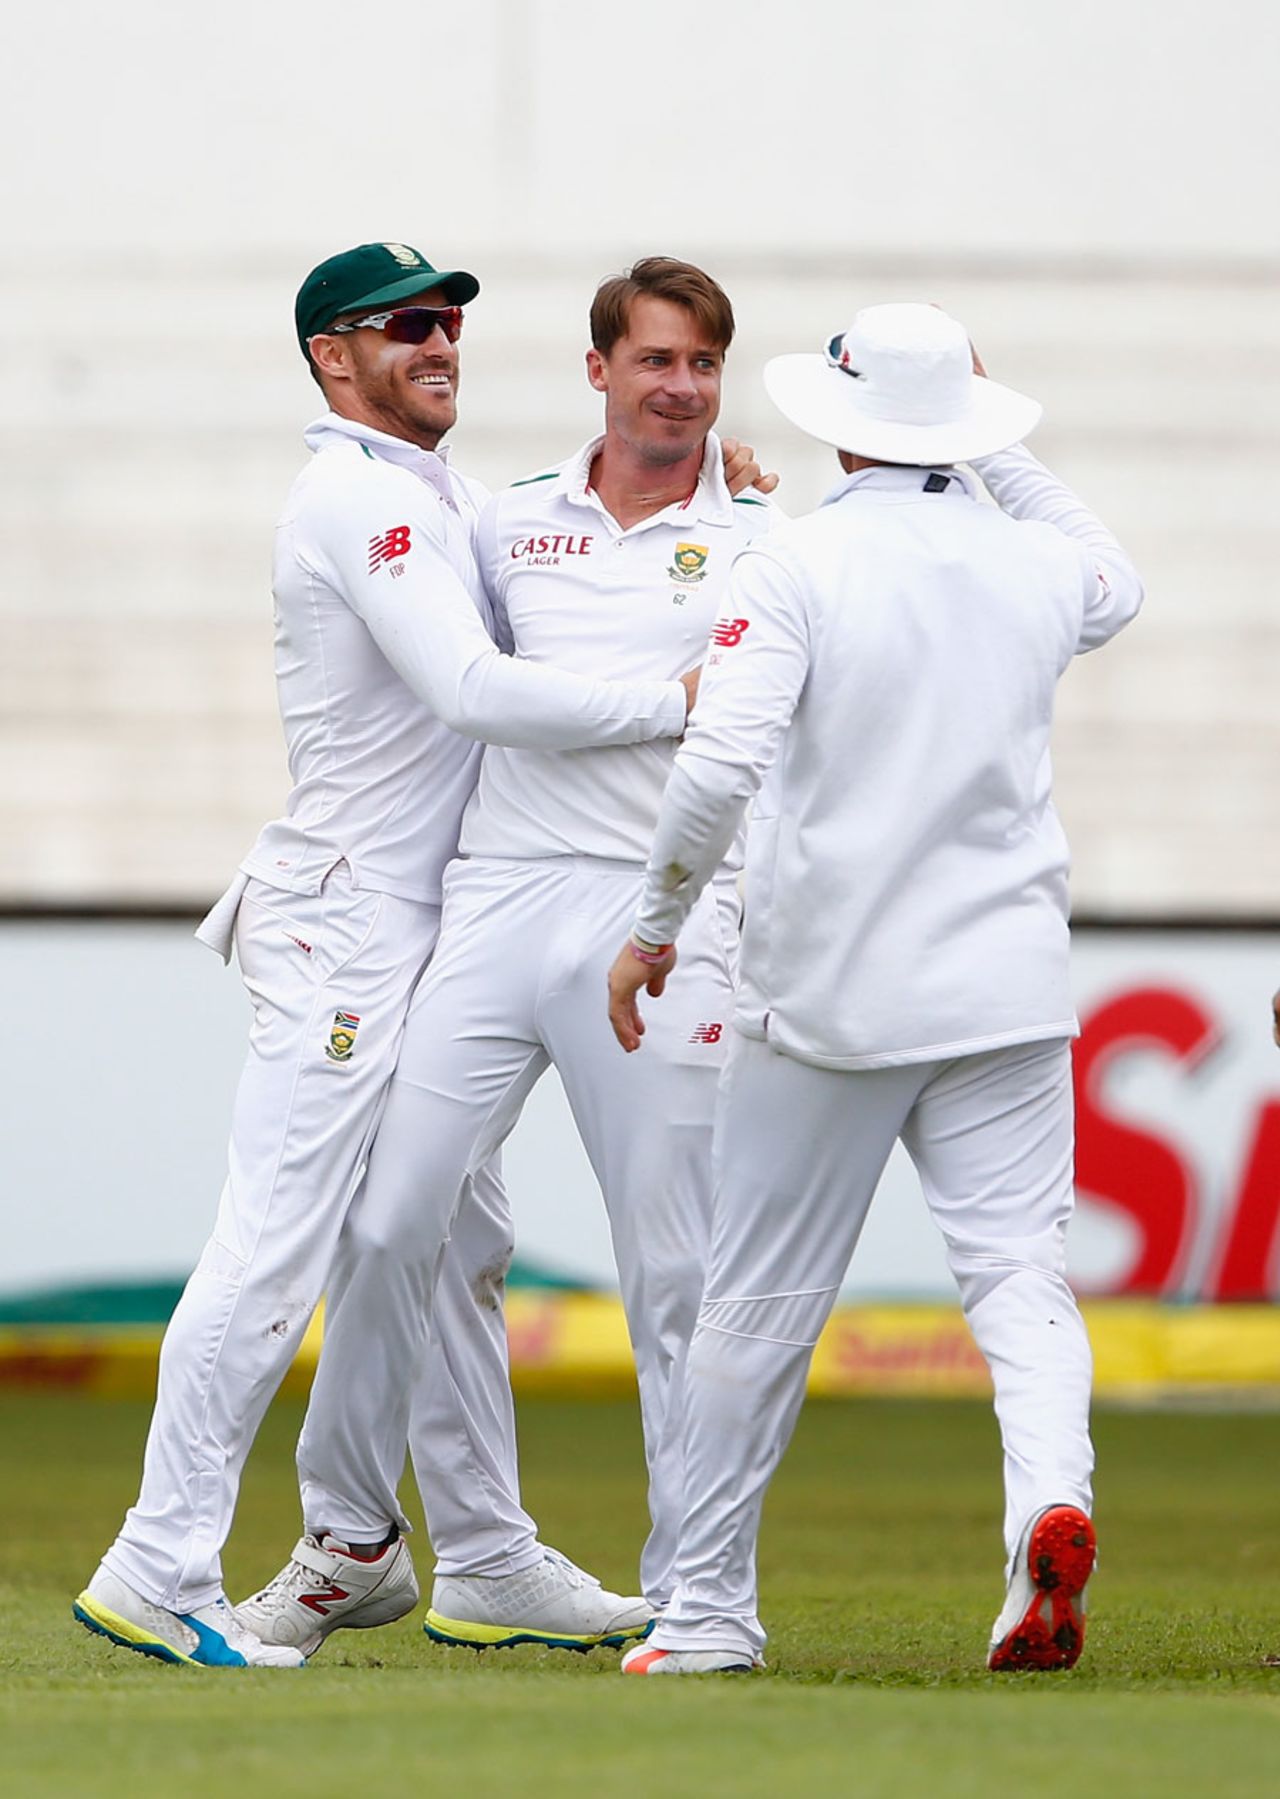 Dale Steyn picked up two wickets before conceding a run, South Africa v England, 1st Test, Durban, 1st day, December 26, 2015